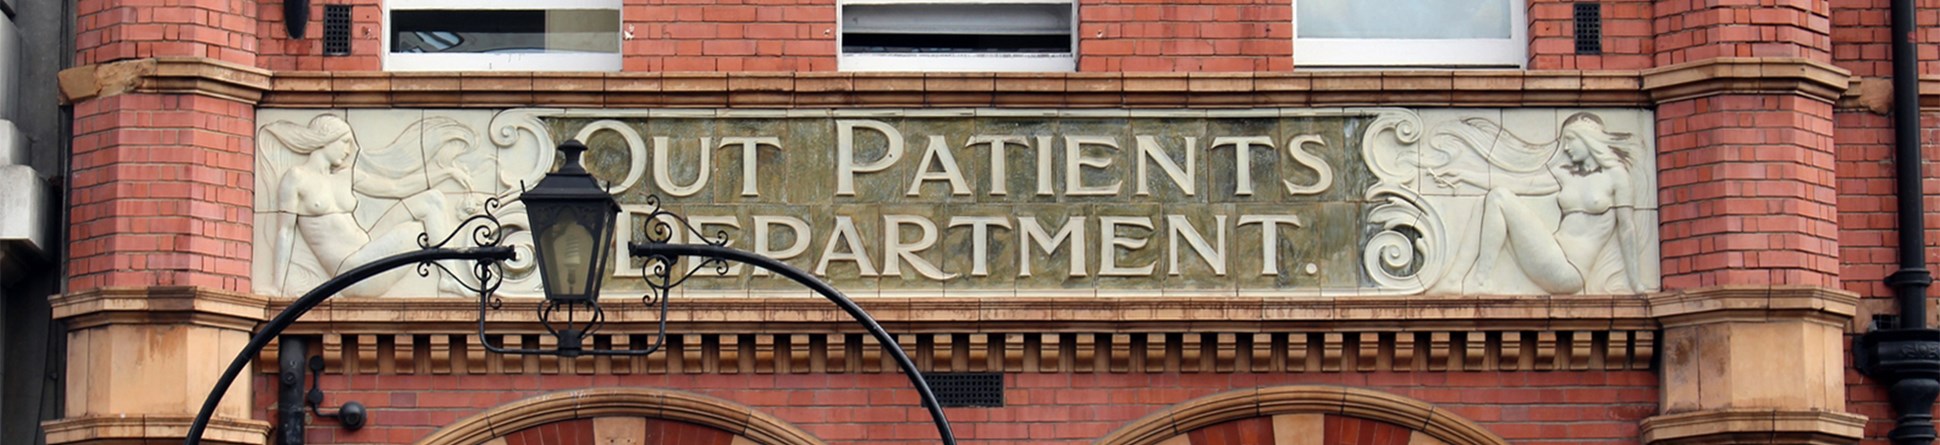 Entrance with the words 'Out Patients Department' engraved in the stone flanked by two women on either side. A lantern above the entrance gate partly obscures the view of the stone carving on the left